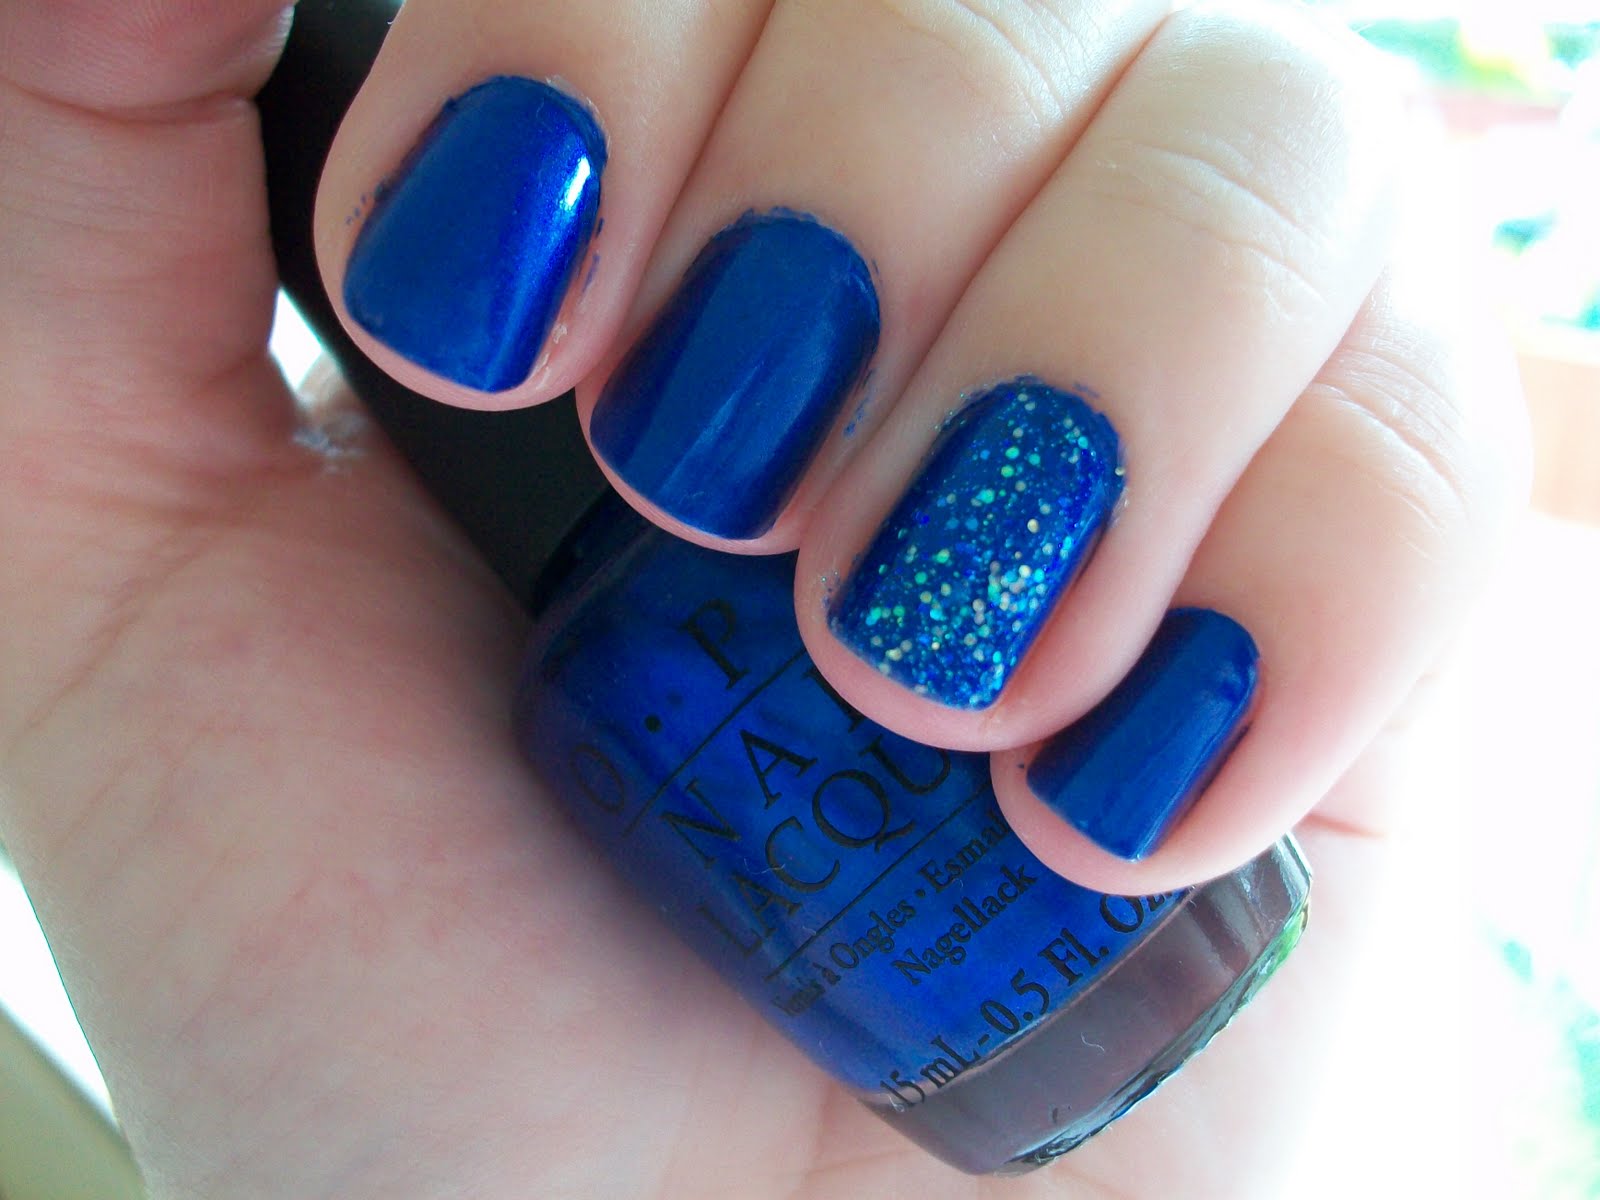 OPI Nail Lacquer in "Blue My Mind" - wide 9